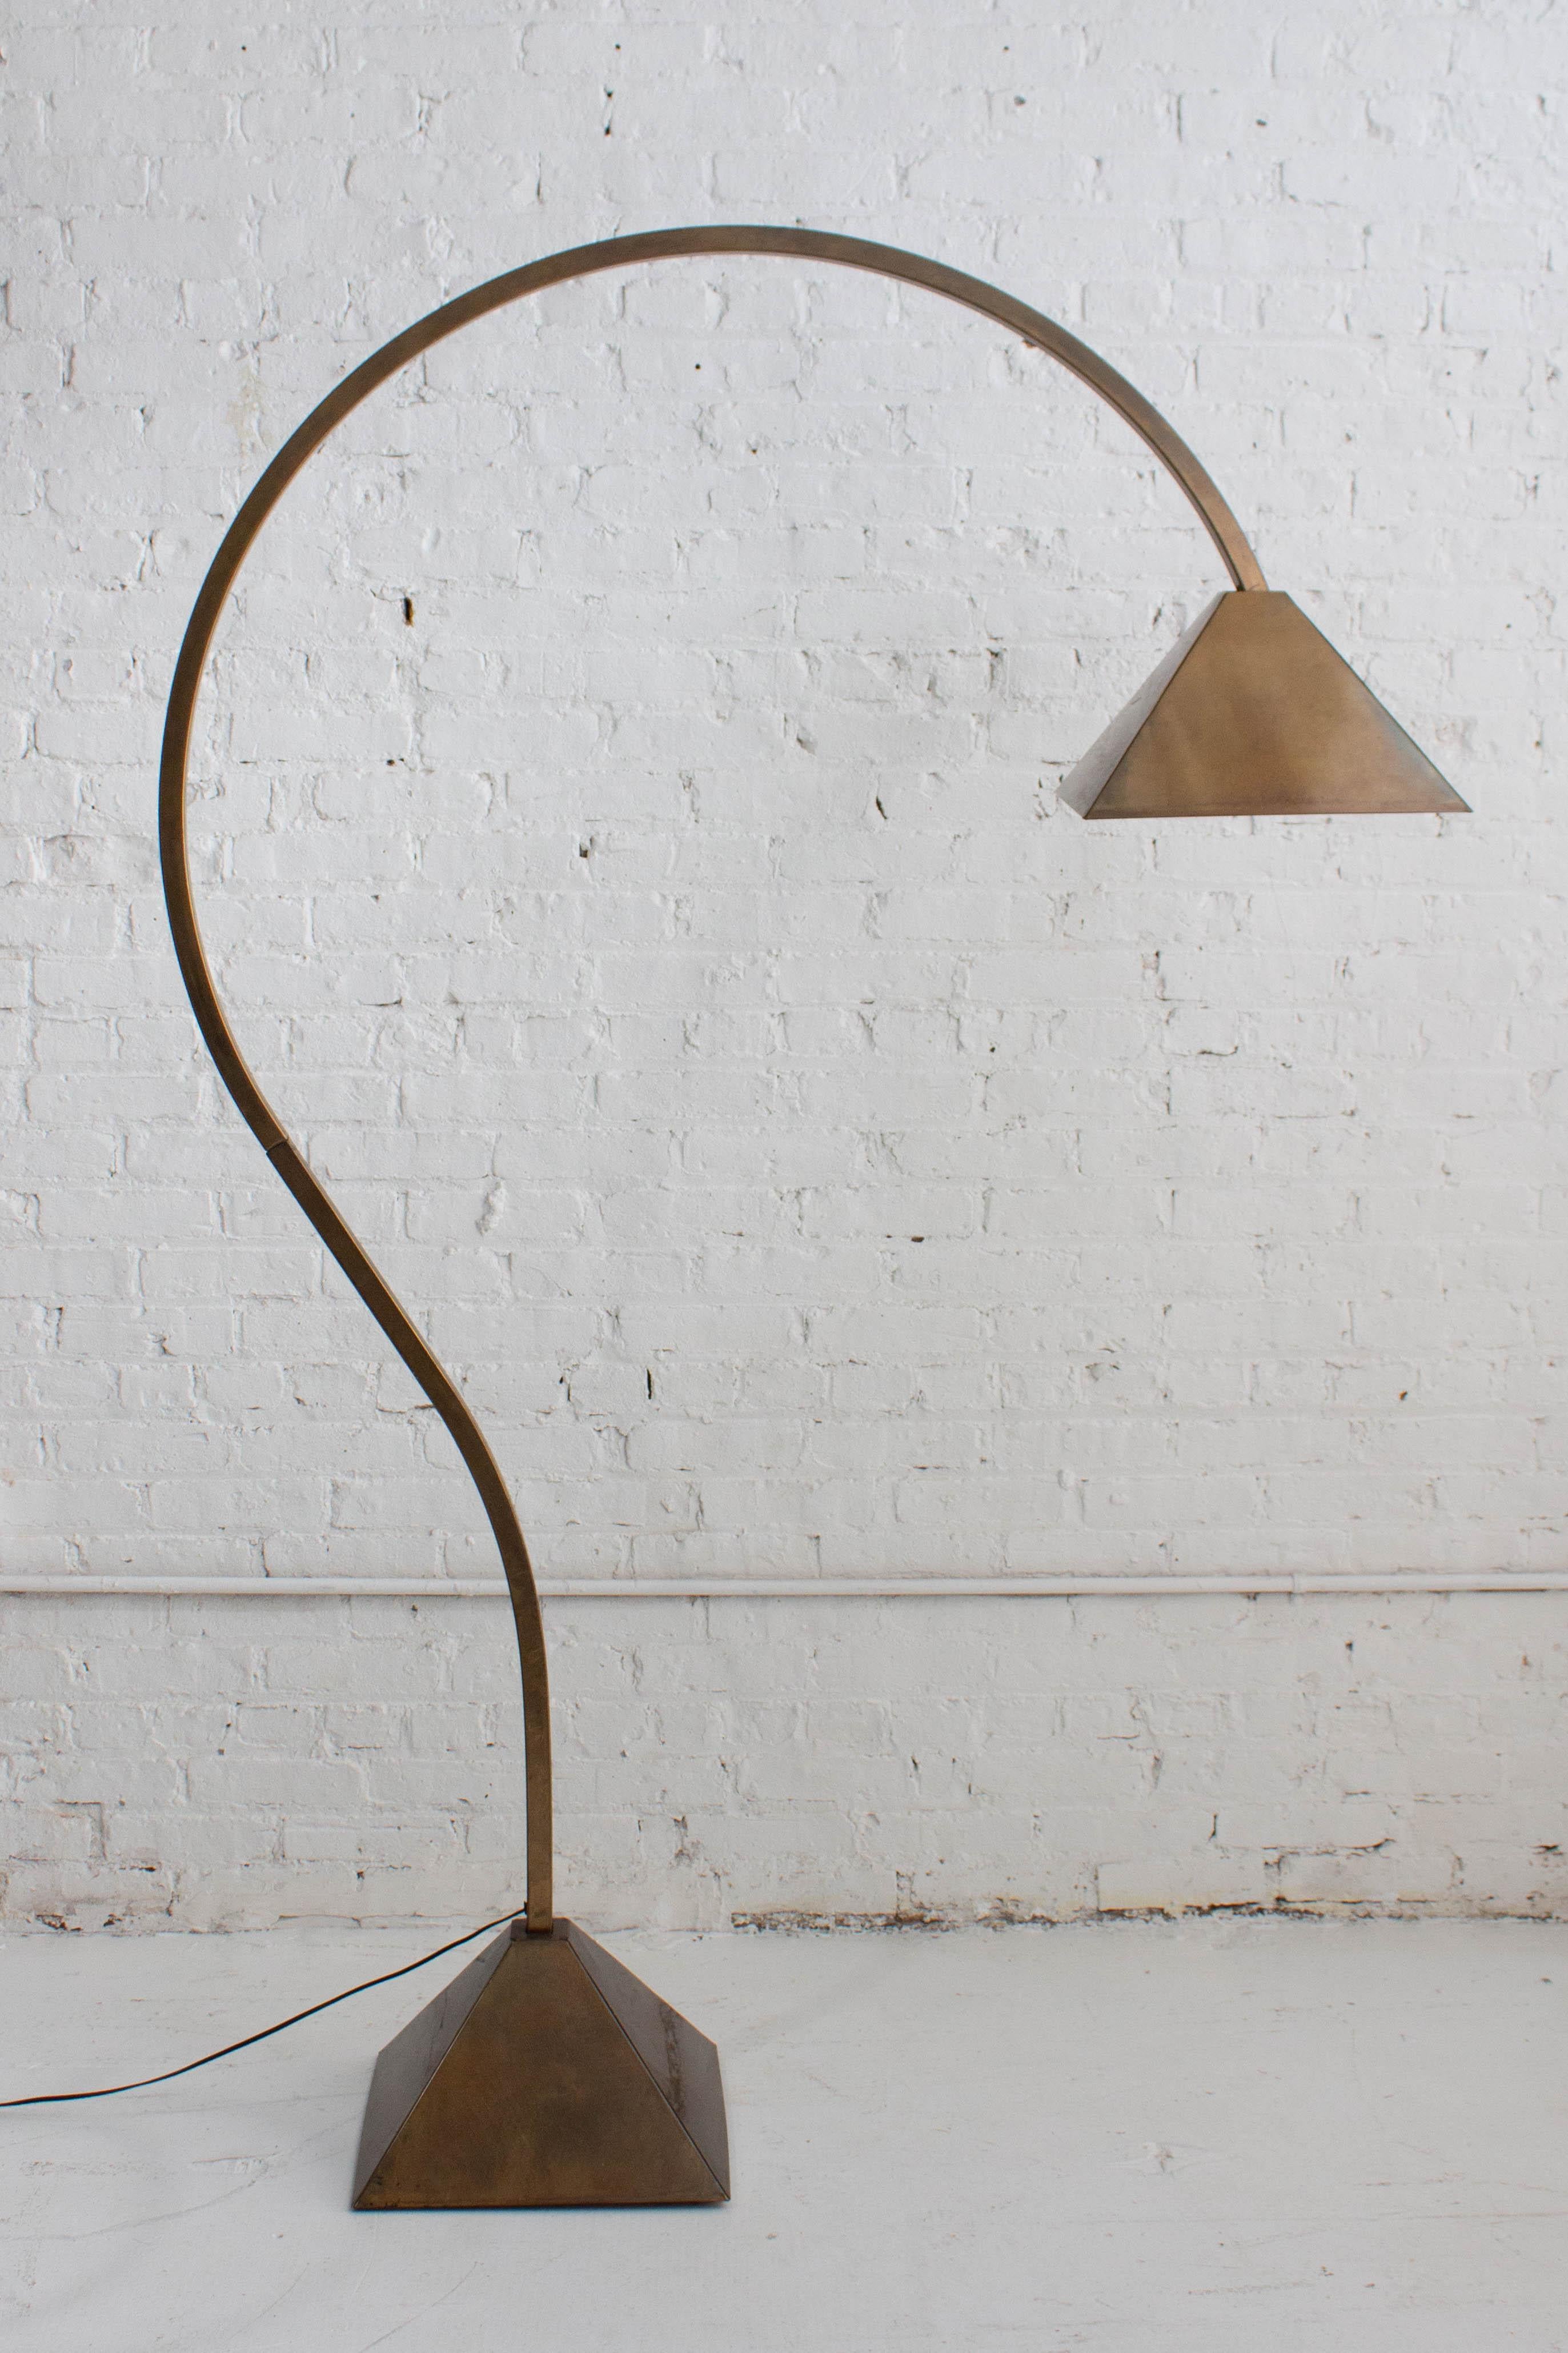 Studio Made Burnished Brass Arc Floor Lamp In Good Condition For Sale In Brooklyn, NY